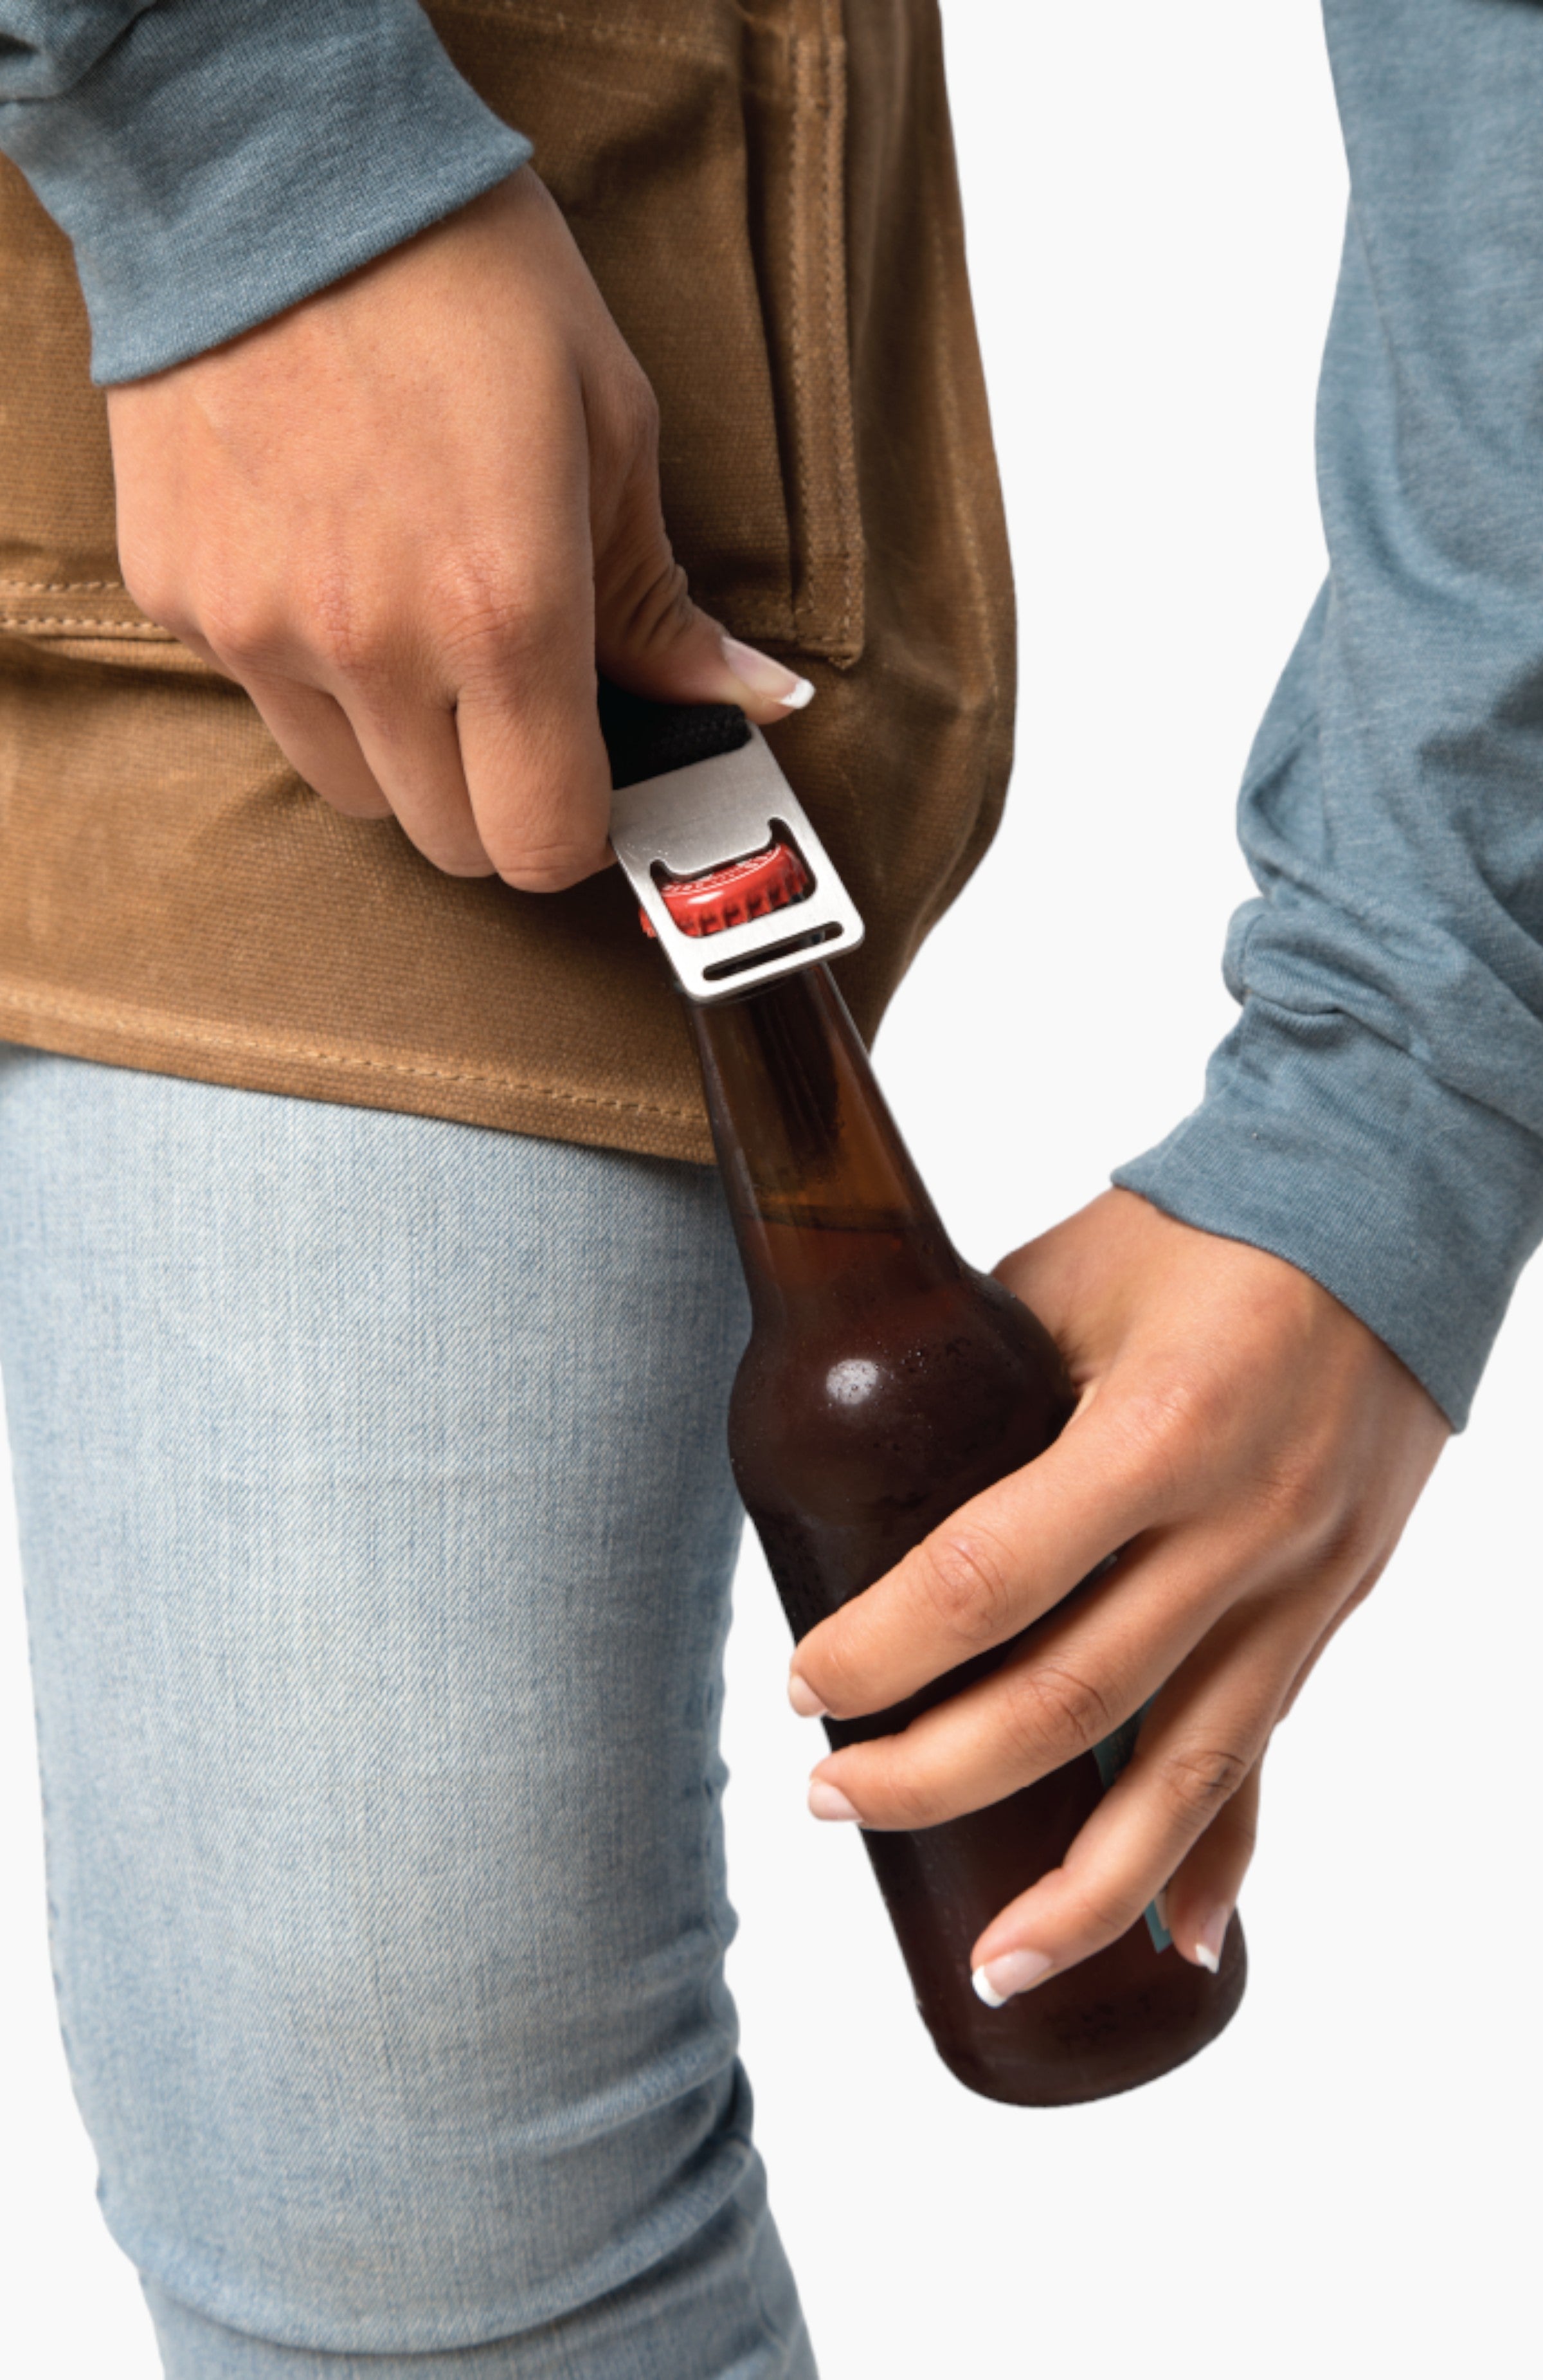 A person opening a bottle with a bottle opener that is attached to the apron.